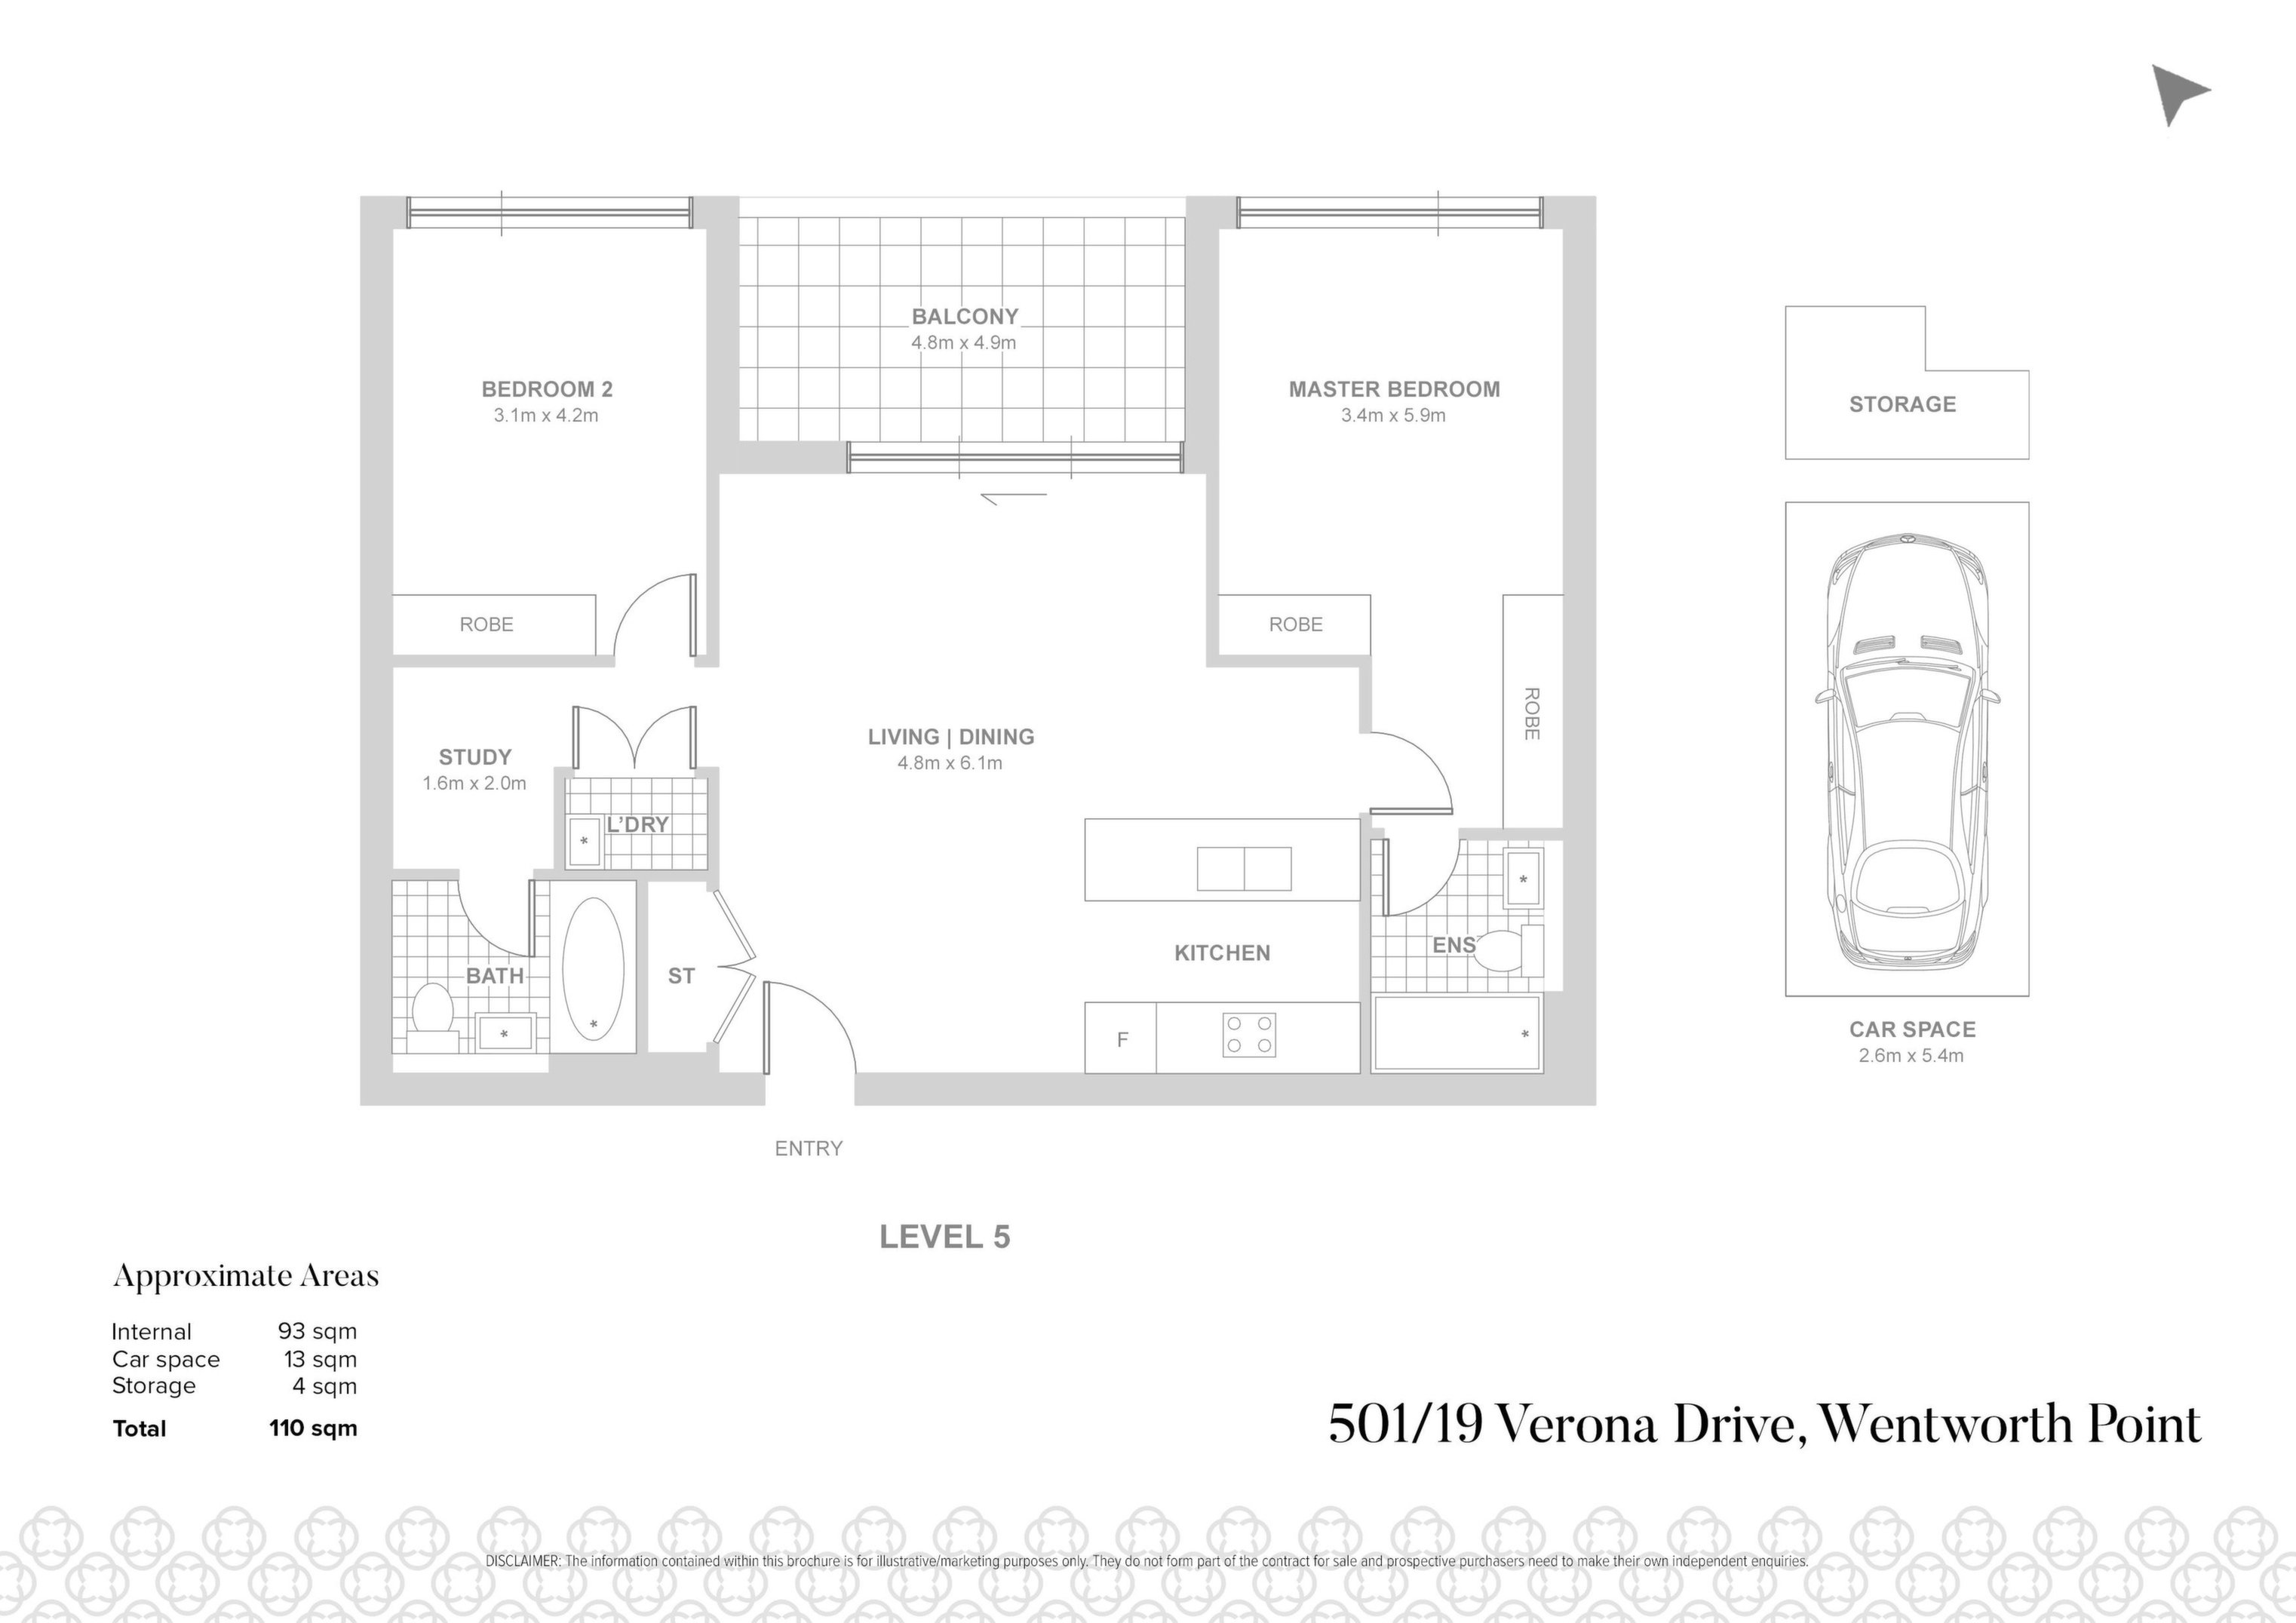 501/19 Verona Drive, Wentworth Point Sold by Chidiac Realty - floorplan